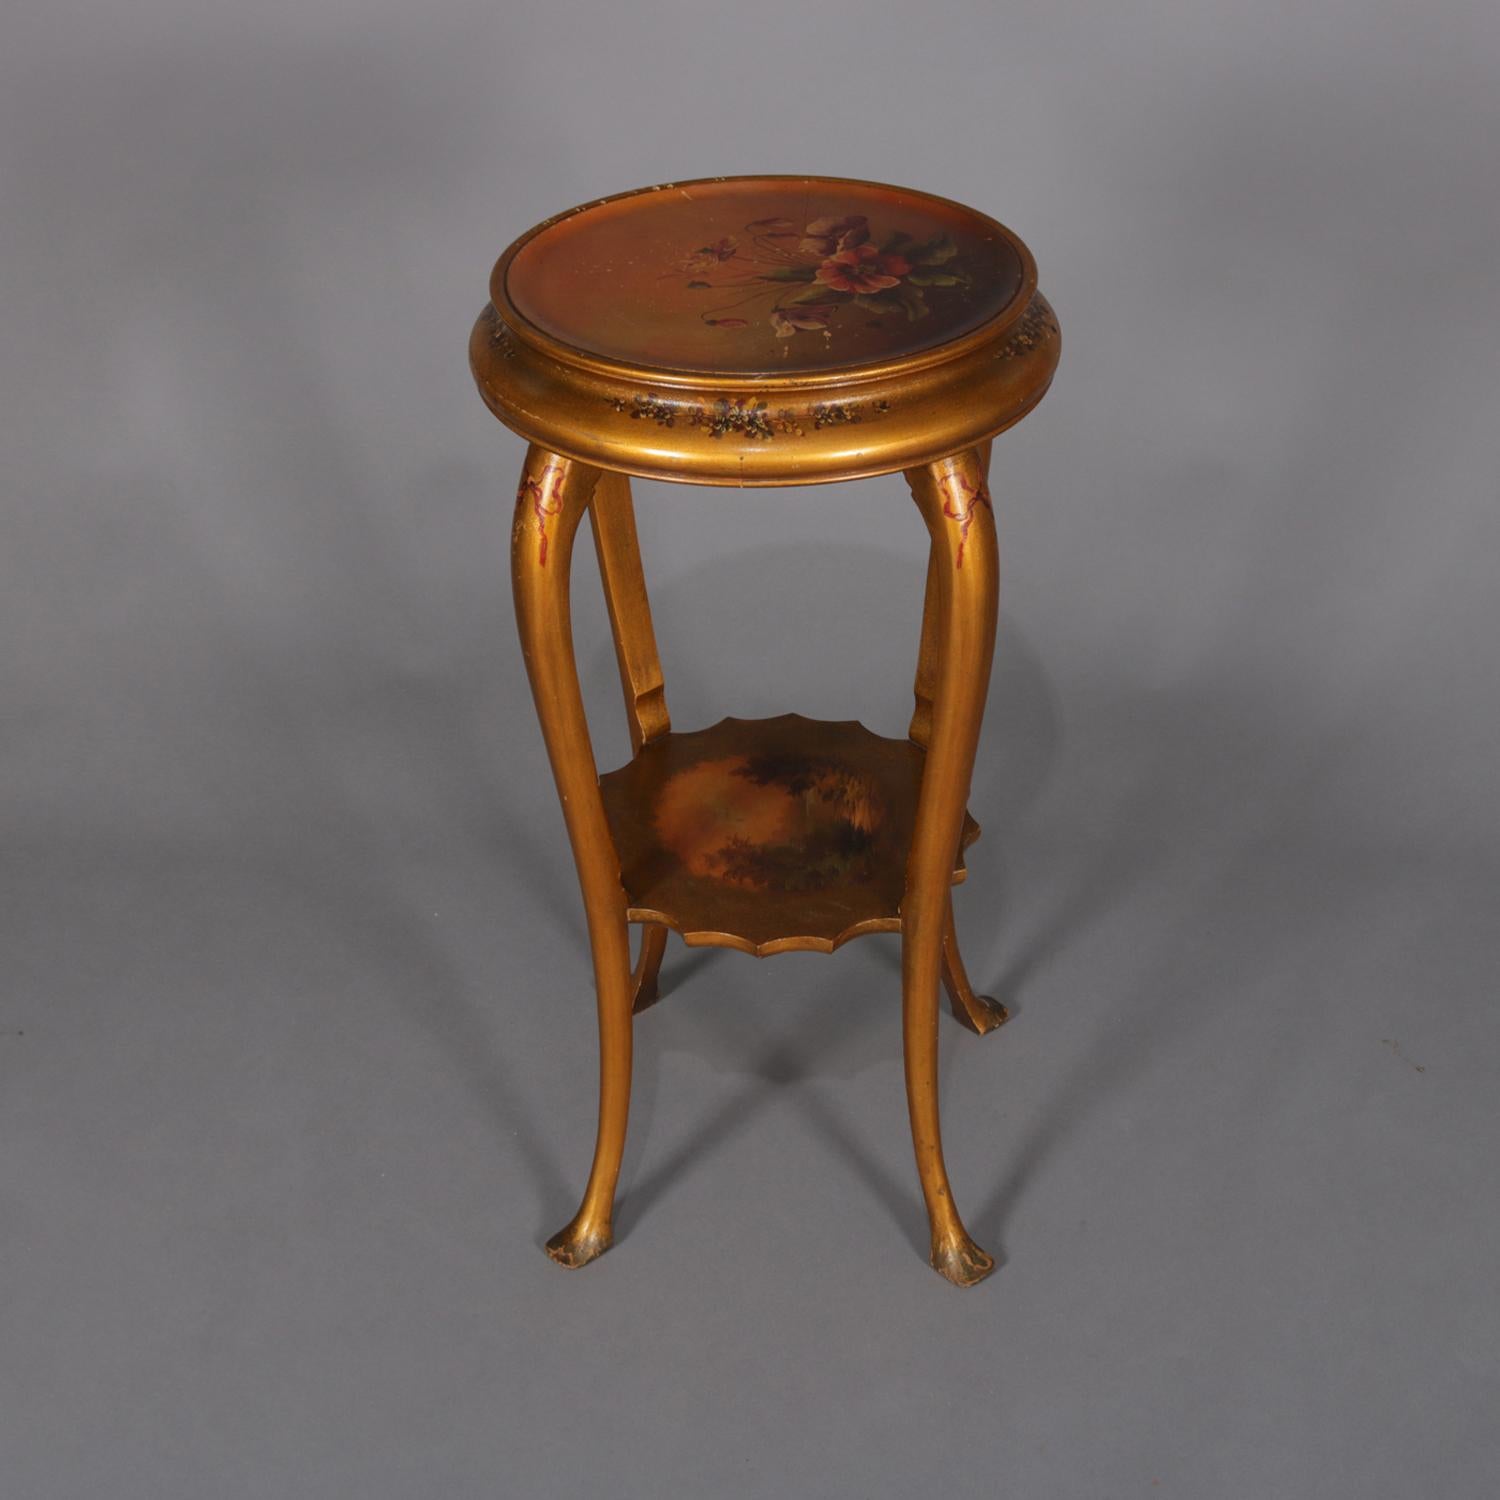 Vernis Martin Hand-Painted Landscape and Floral Giltwood Plant Stand, circa 1900 1